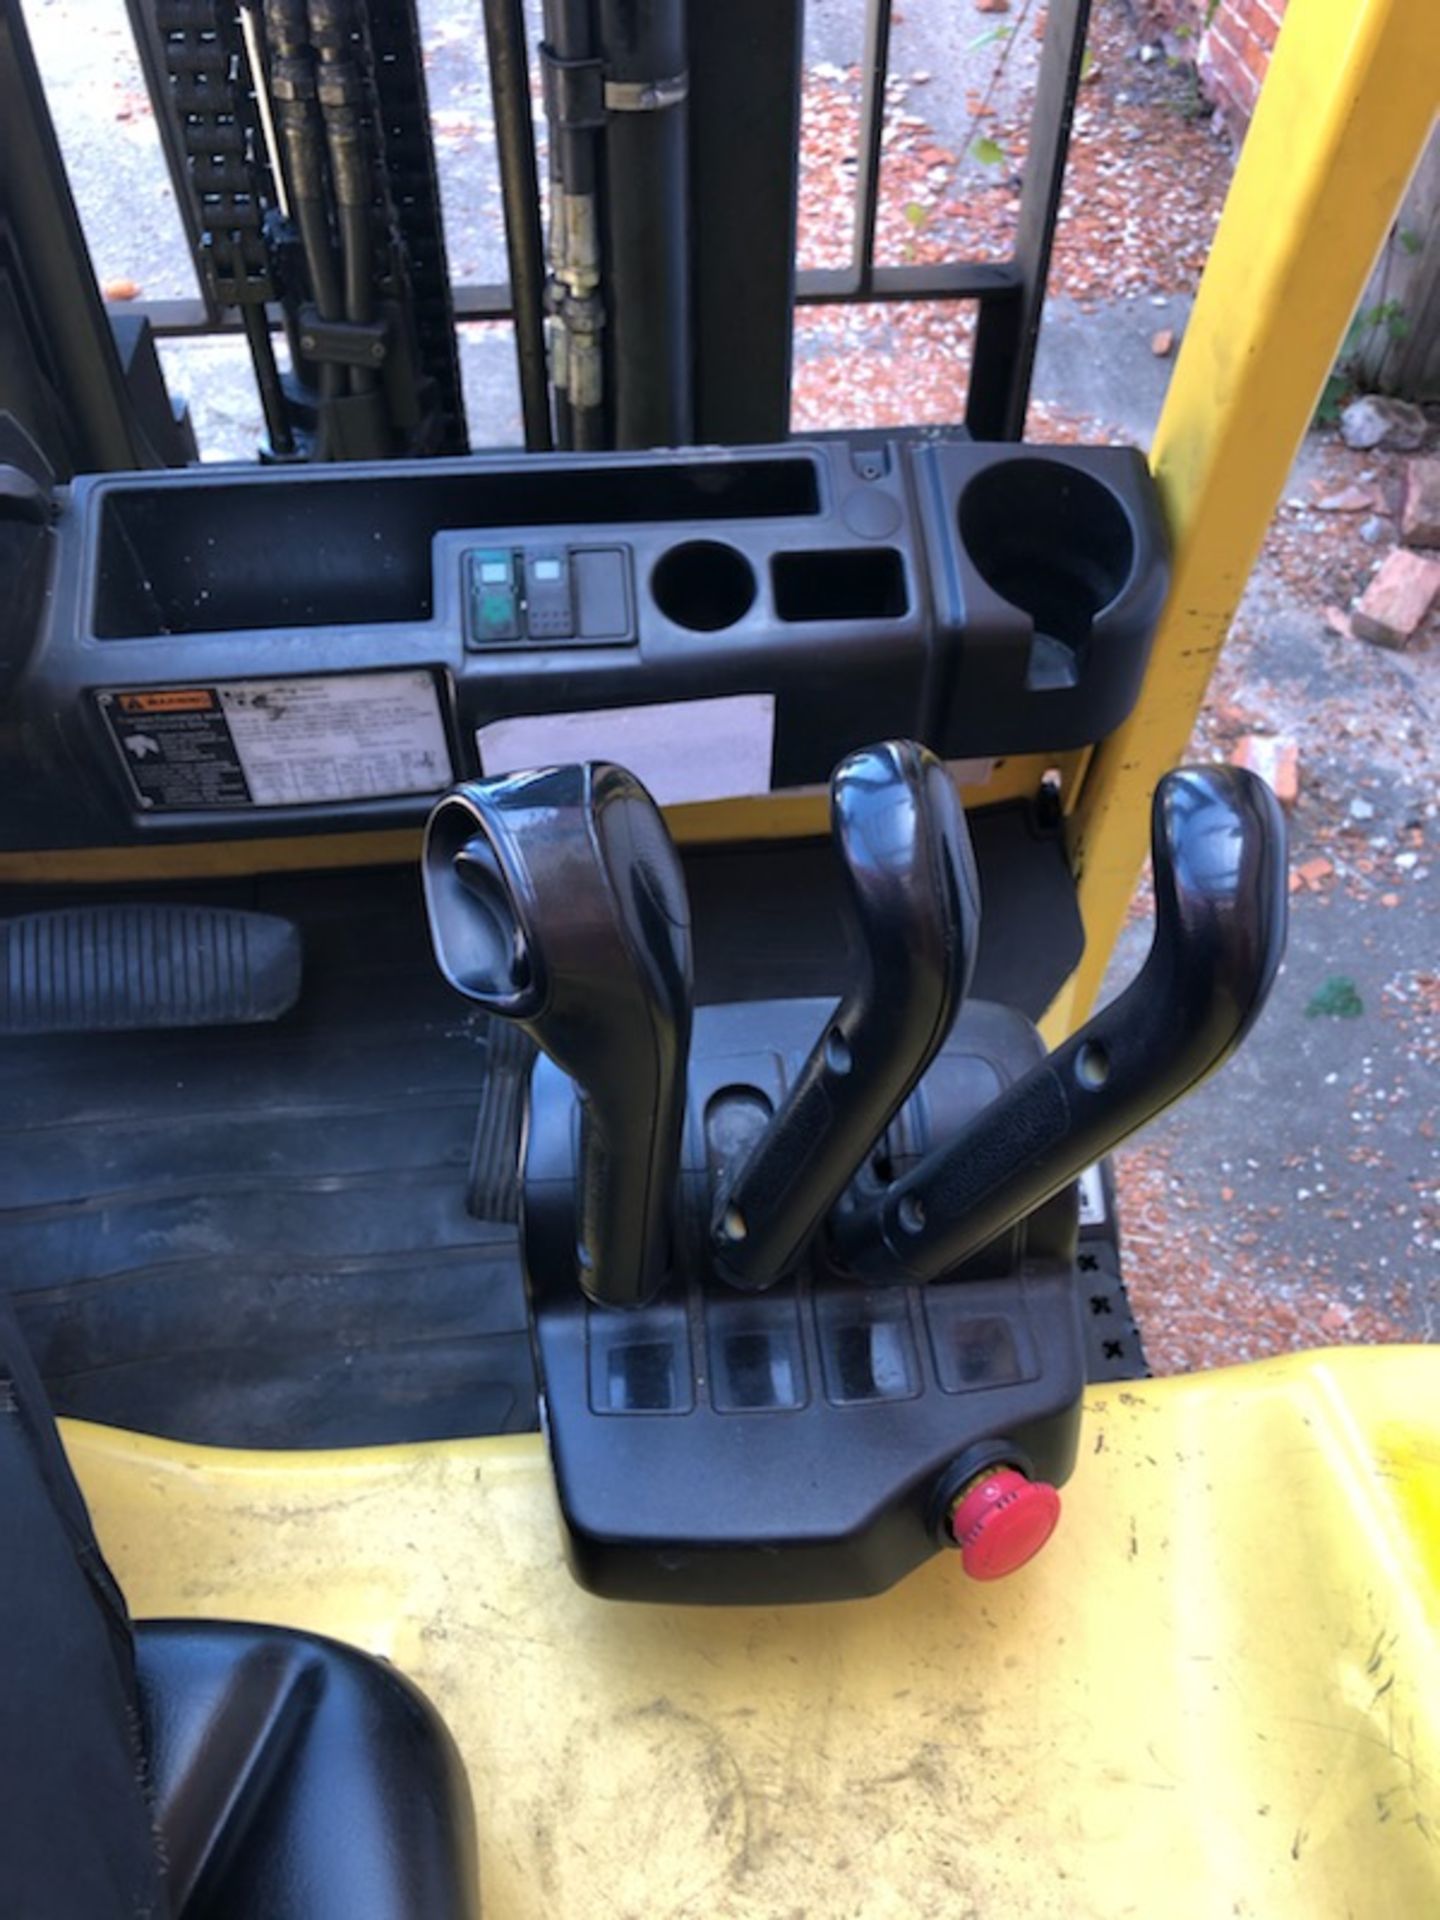 2013 Hyster 8,000 Lb Capacity Electric Forklift Model E80XN - Image 4 of 6